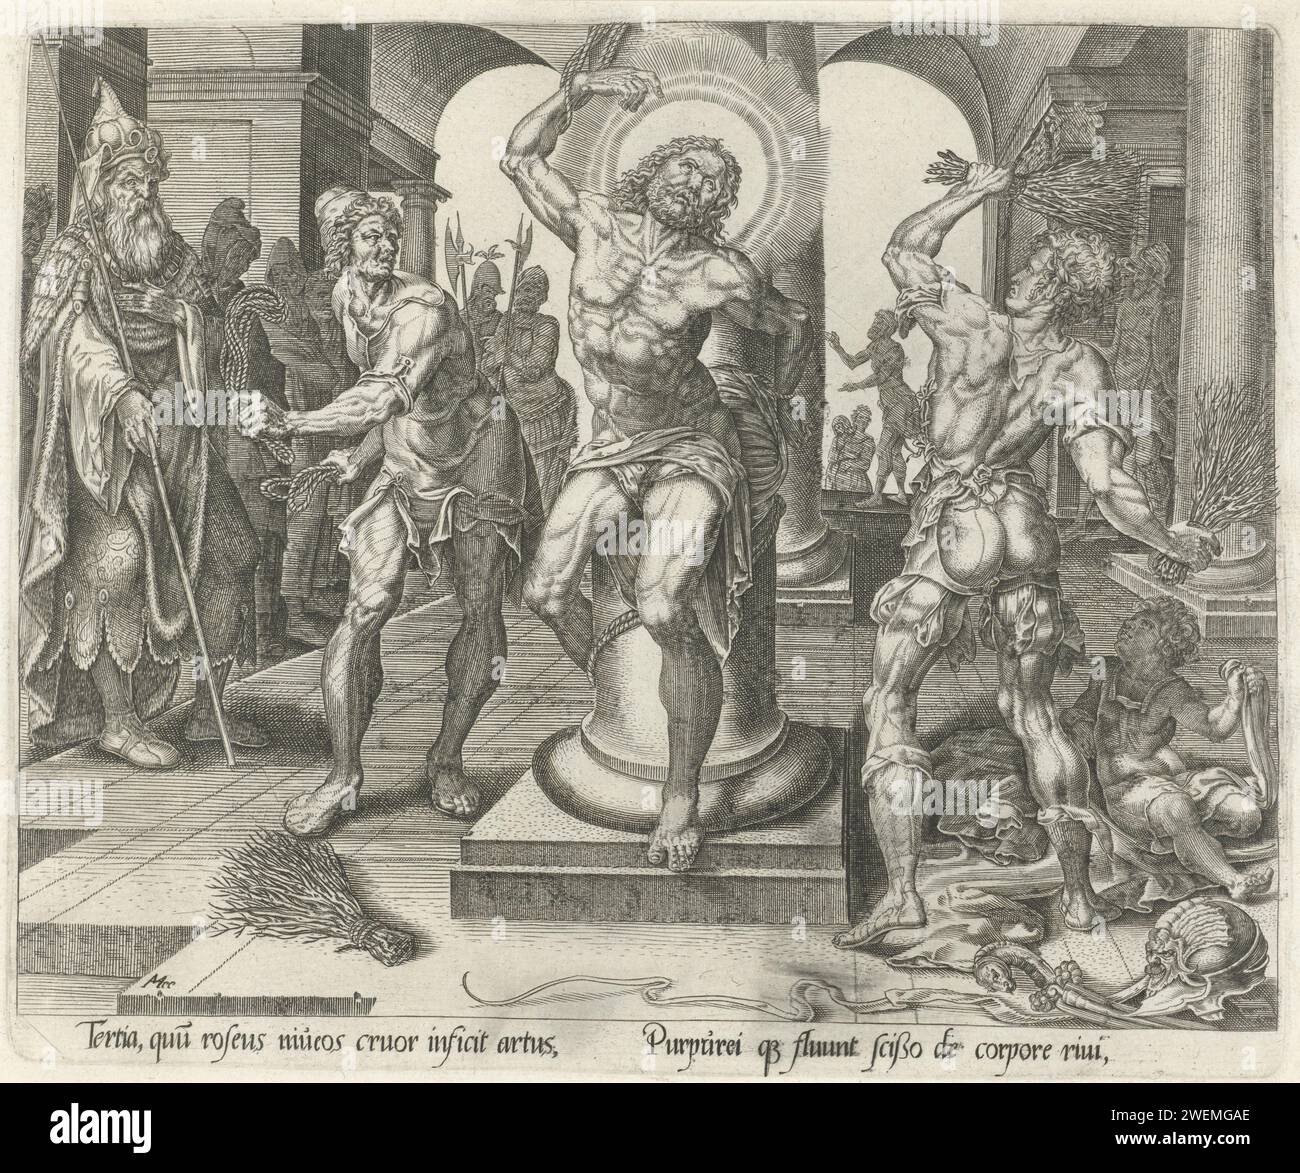 Messeling, Harmen Jansz Muller, After Maarten van Heemskerck, 1565 print Christ, tied to the scenel, is beaten by two men with rod and rope. On the left, Pilatus looks. At the bottom of the margin a verse in Latin. Print is part of a series about the seven bleeding of Christ.  paper engraving the crowning with thorns: soldiers with sticks place a thorny crown on Christ's head and give him a reed (Matthew 27:27-31; Mark 15:16-20; John 19:2-3) Stock Photo